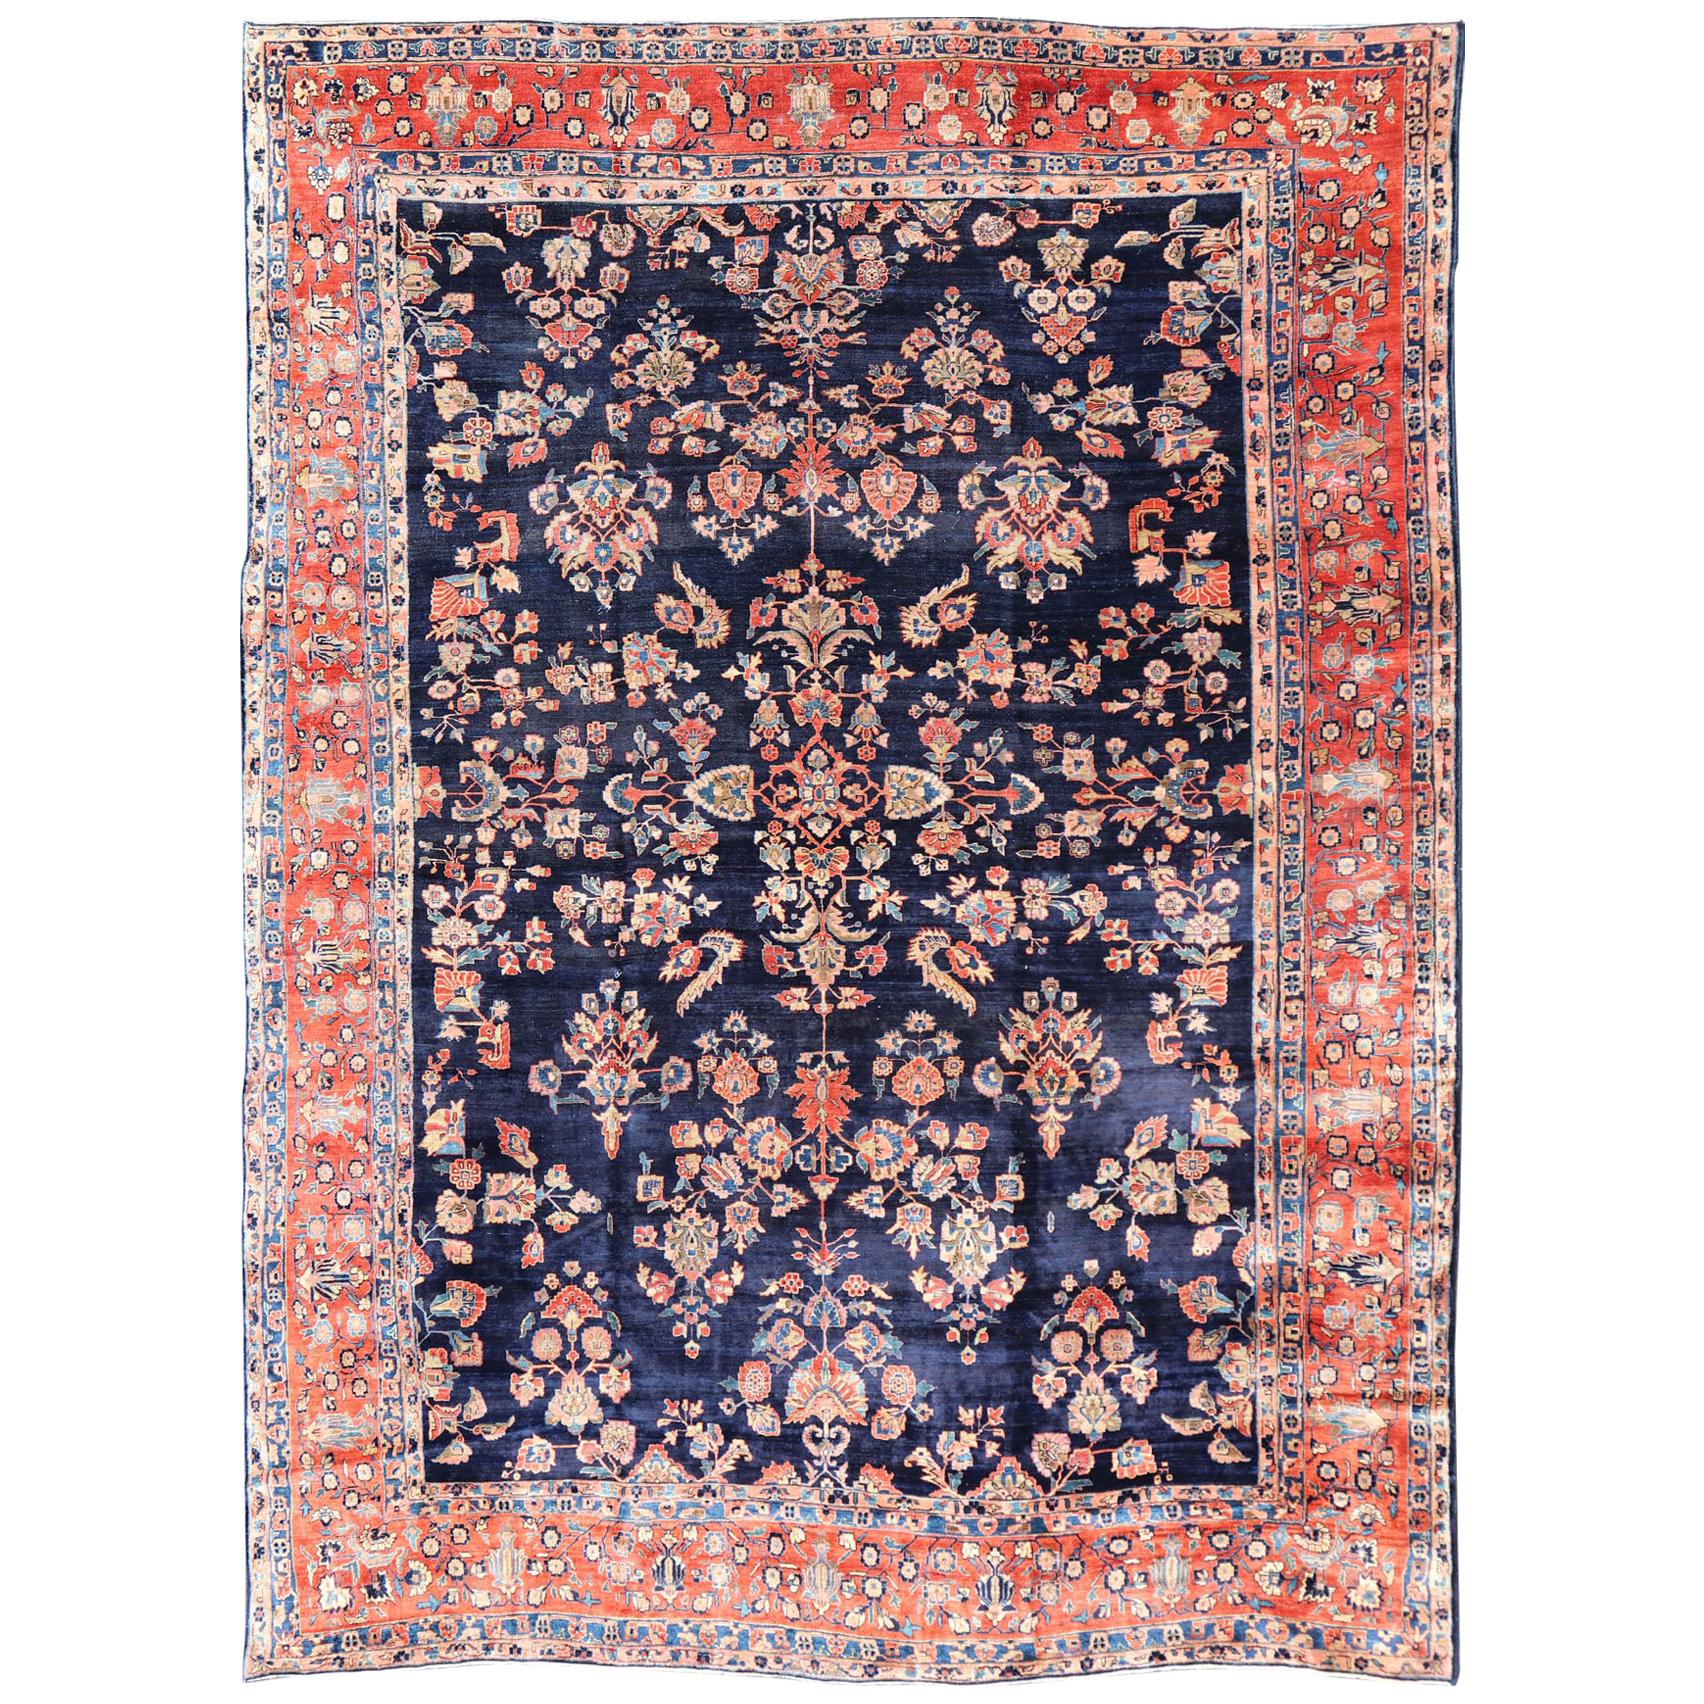 Antique Large Sarouk Faraghan Rug with Floral Pattern in Navy and Orange-Red For Sale